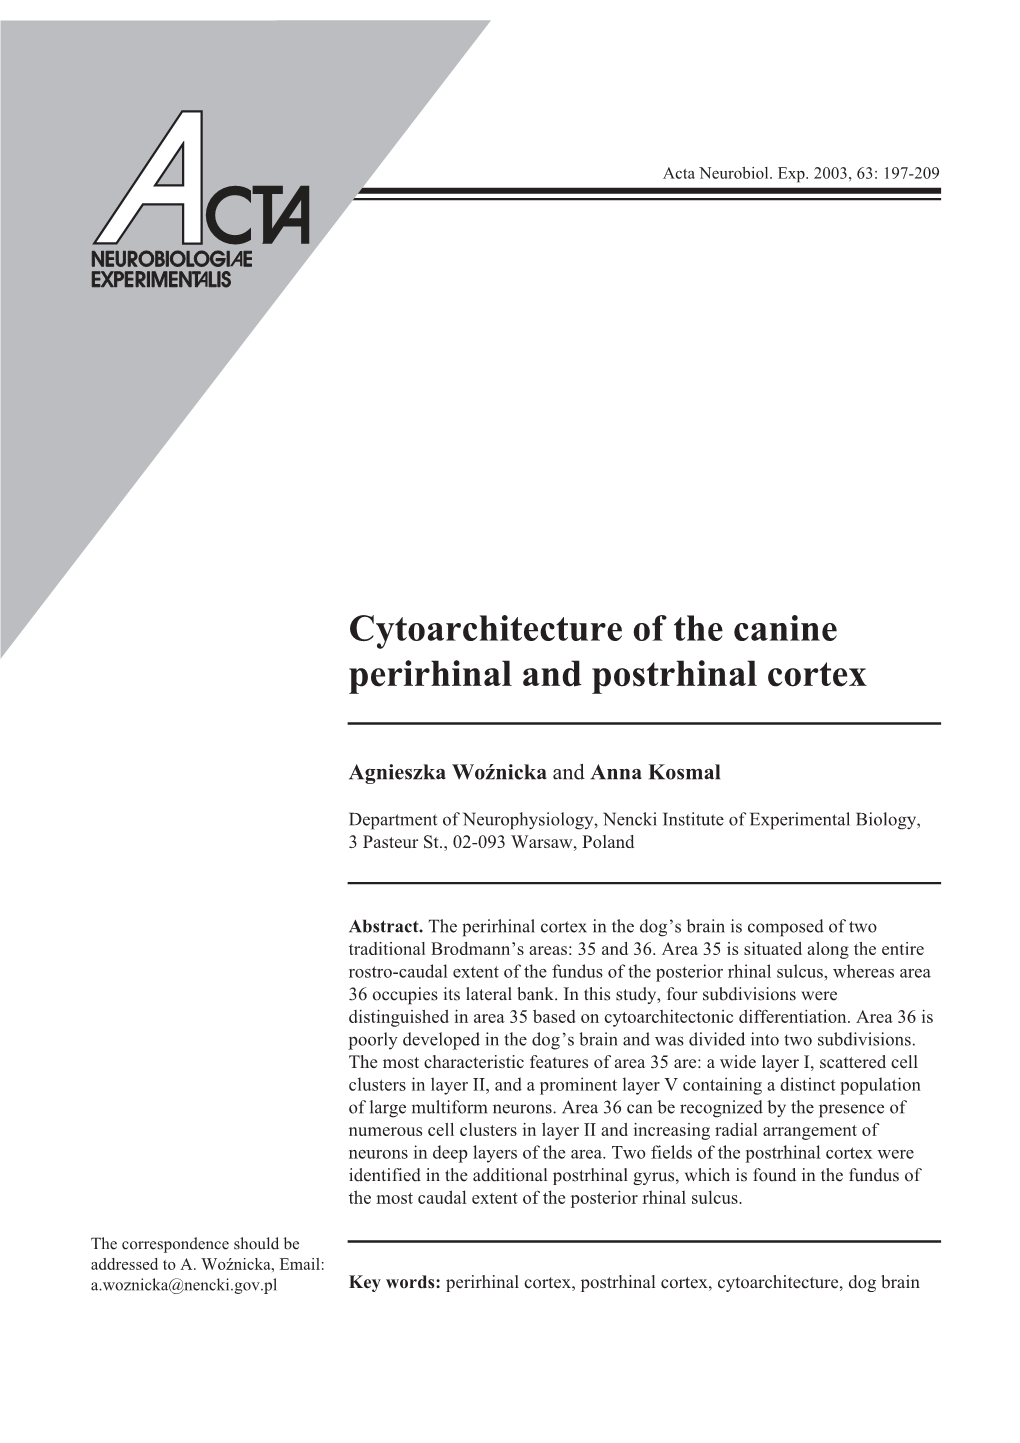 Cytoarchitecture of the Canine Perirhinal and Postrhinal Cortex